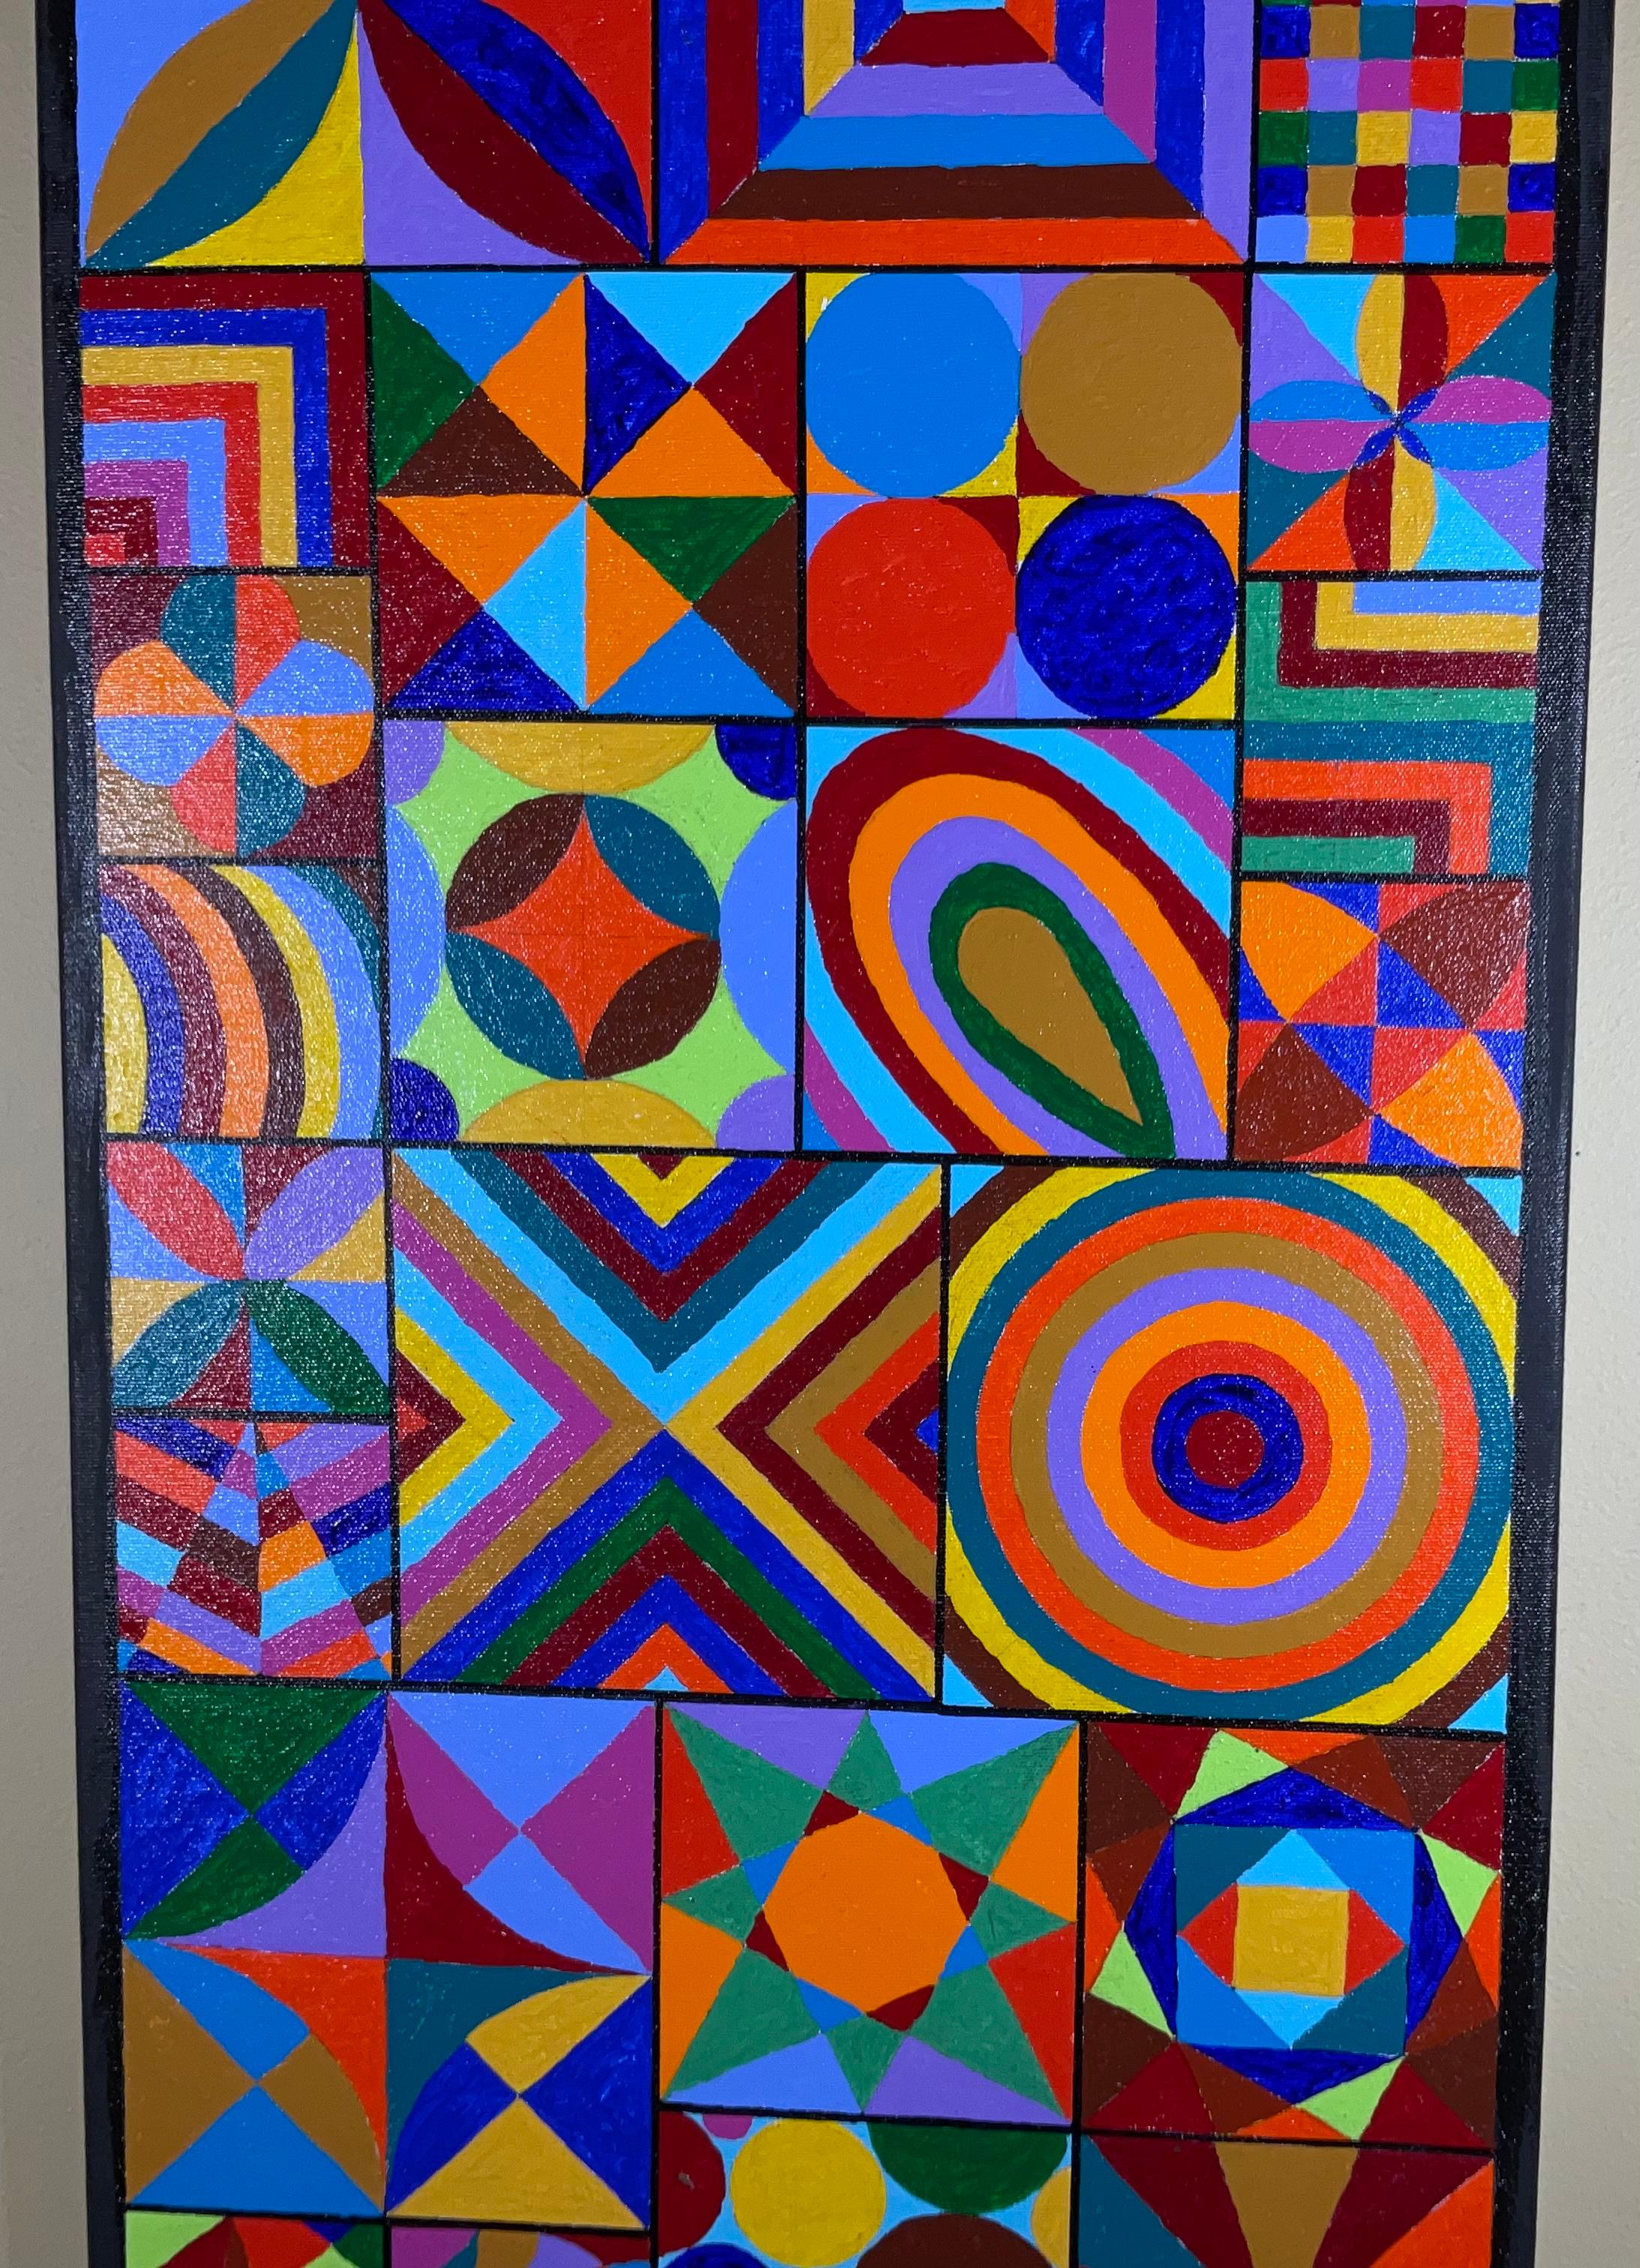 Hand-Painted Geometric Style by Artist Stanley Brundage